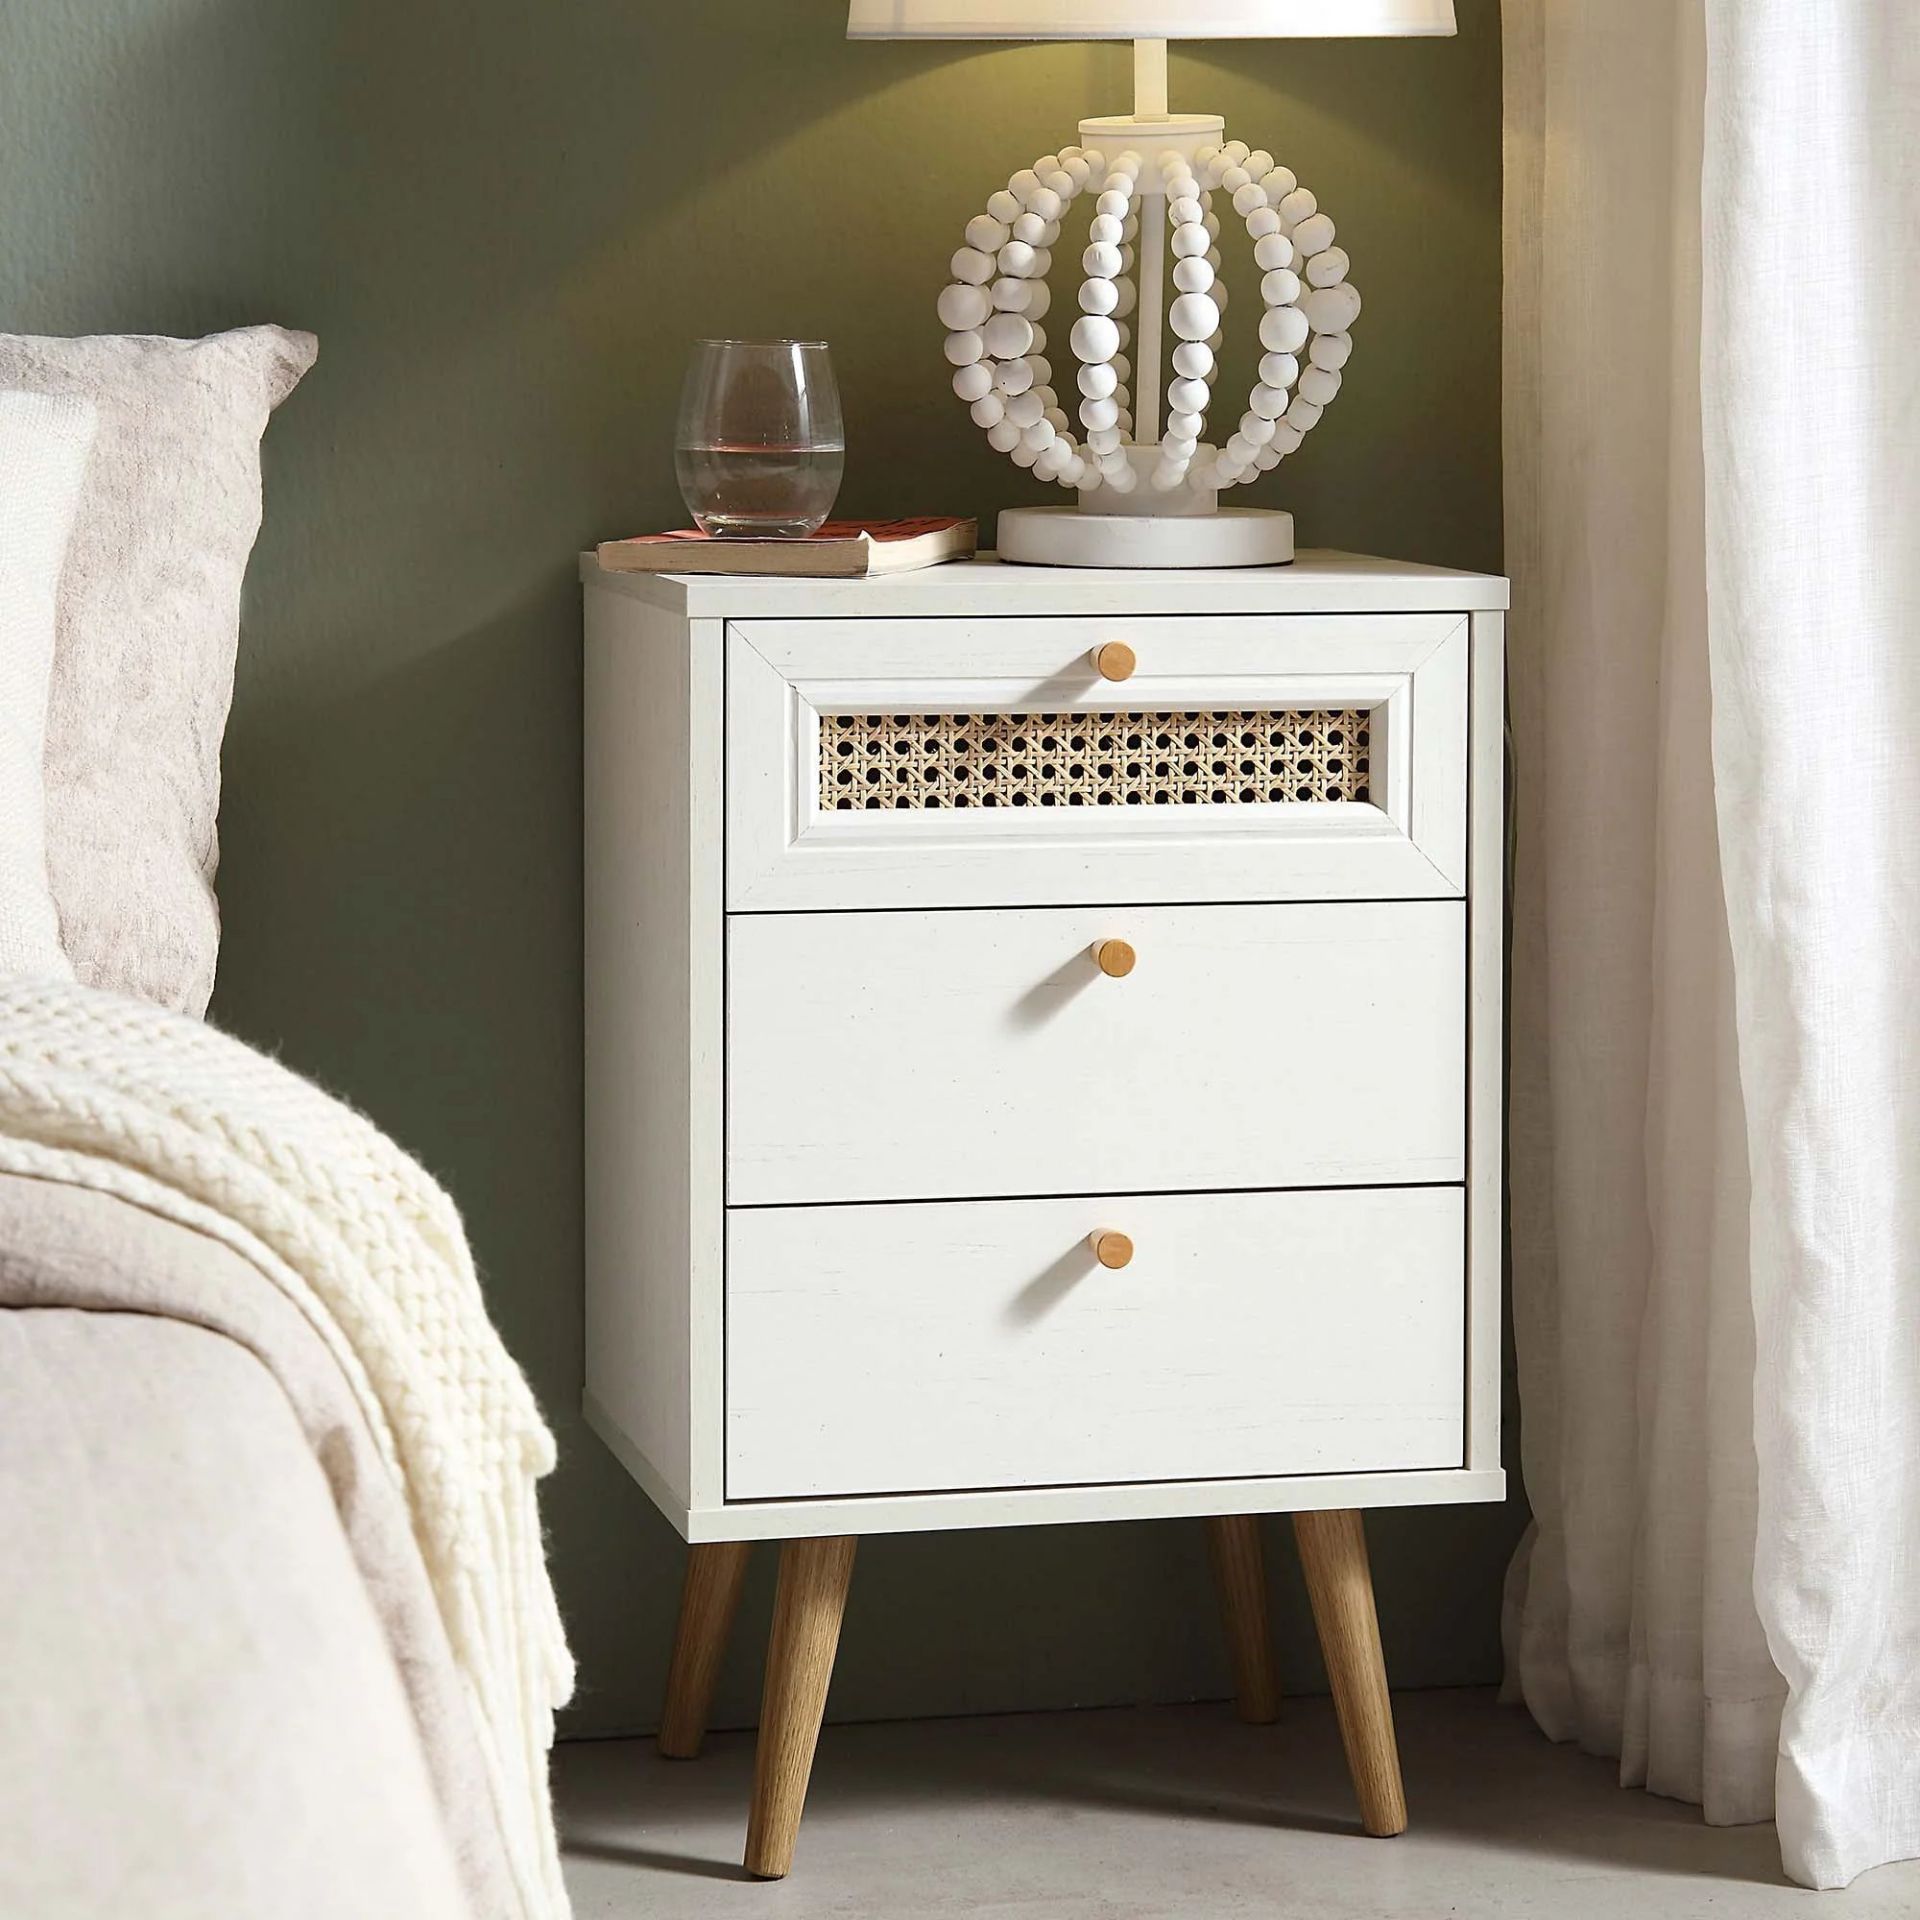 Anya Woven Rattan 3-Drawer Bedside Table in White. - ER25. RRP £139.99. Our Anya bedside table is - Image 3 of 4